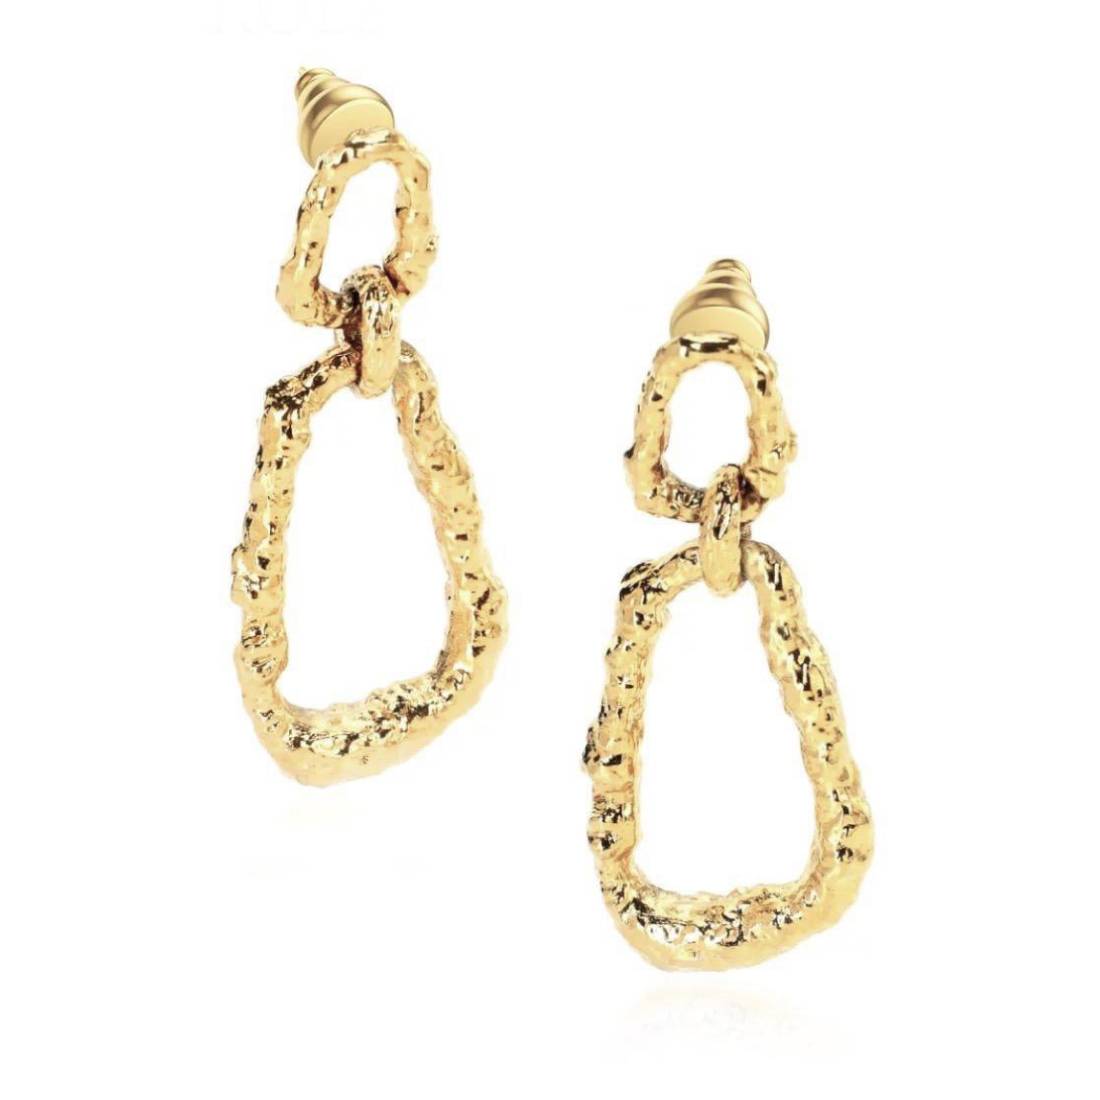 Gold Textured Drop Earrings on display